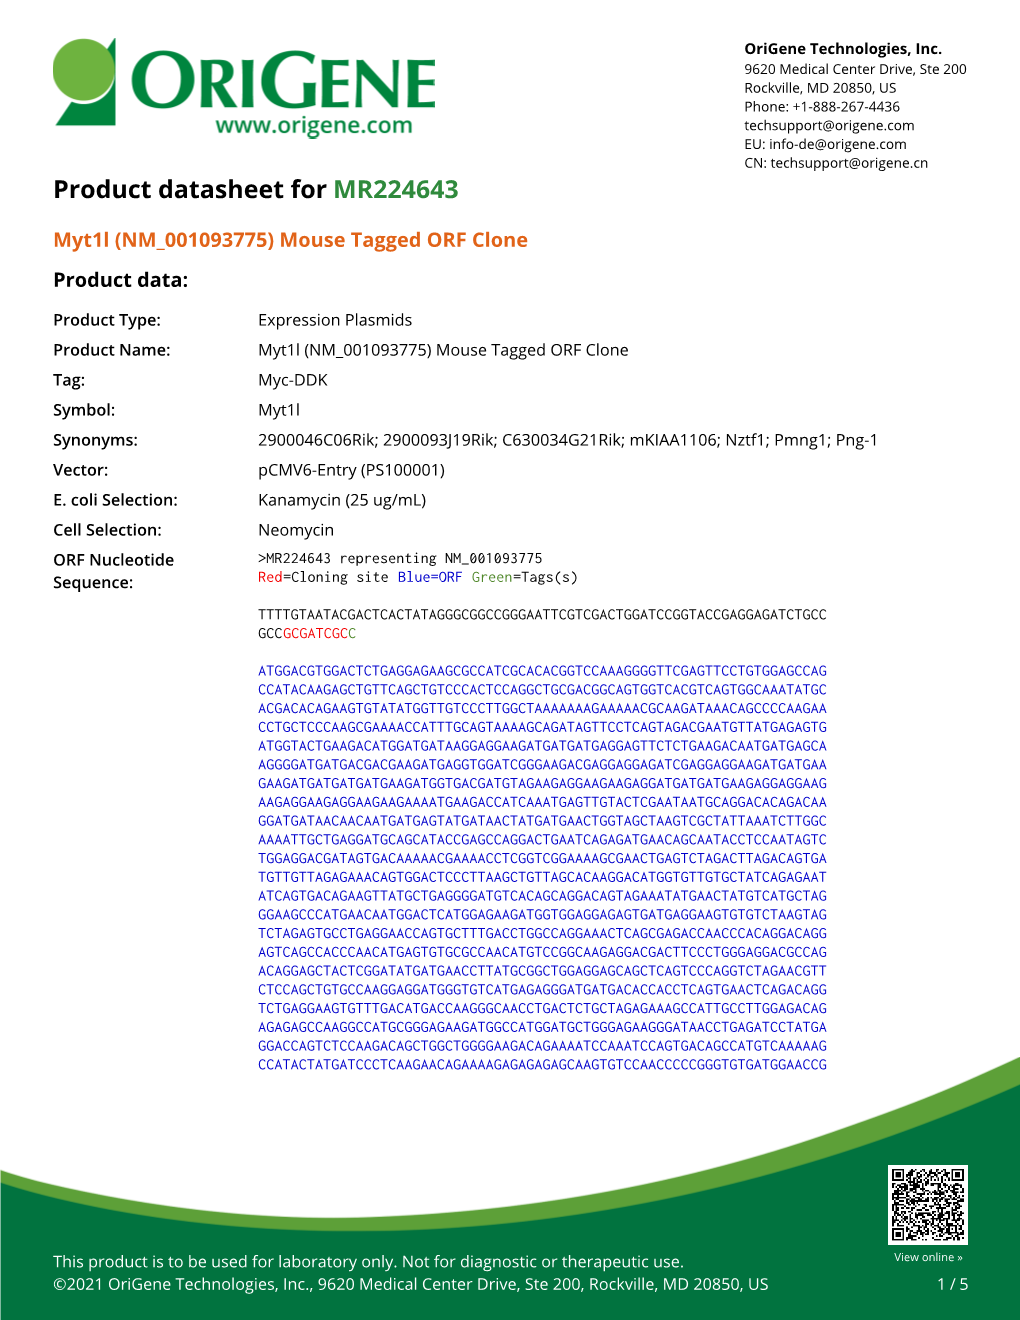 Myt1l (NM 001093775) Mouse Tagged ORF Clone Product Data